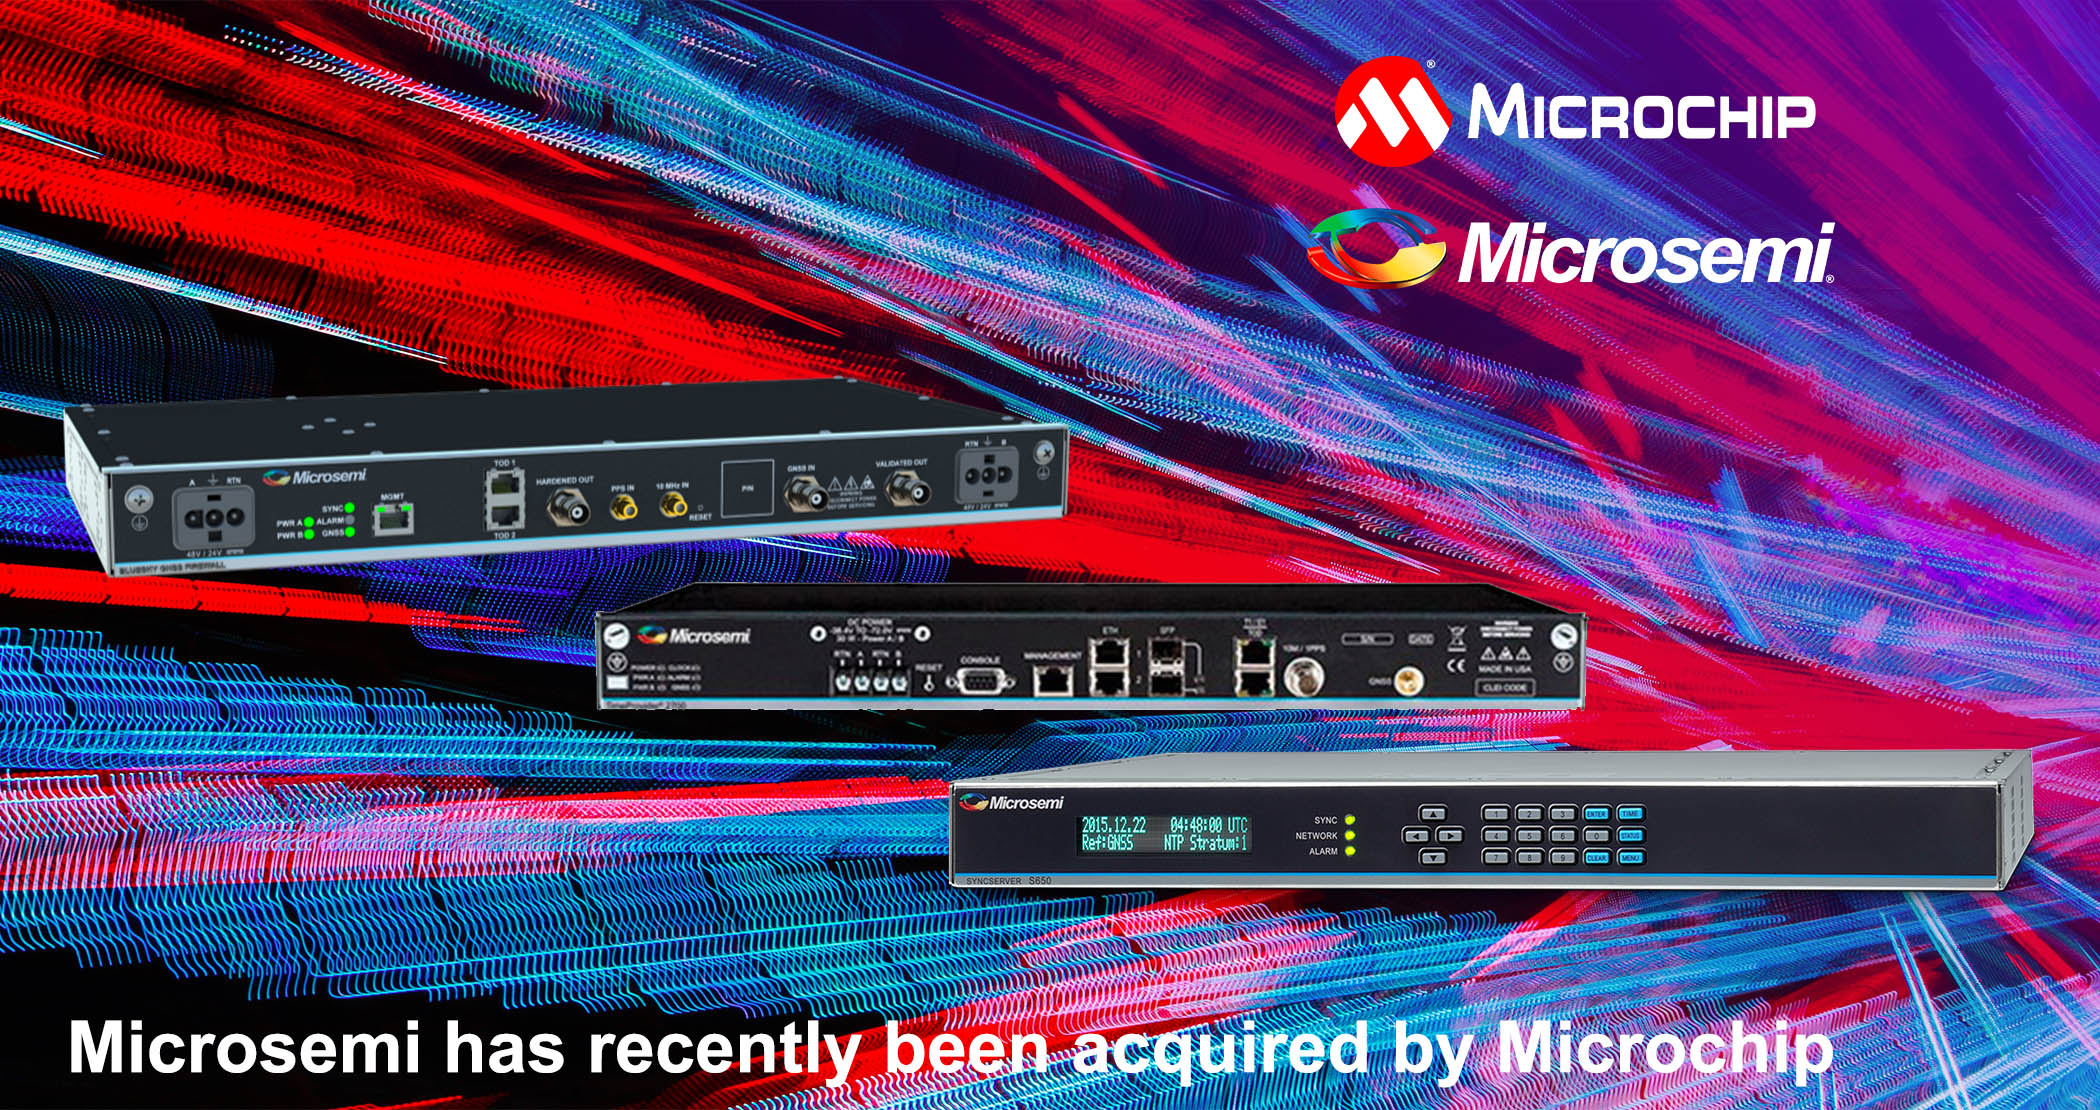 Microsemi has recently been acquired by Microchip